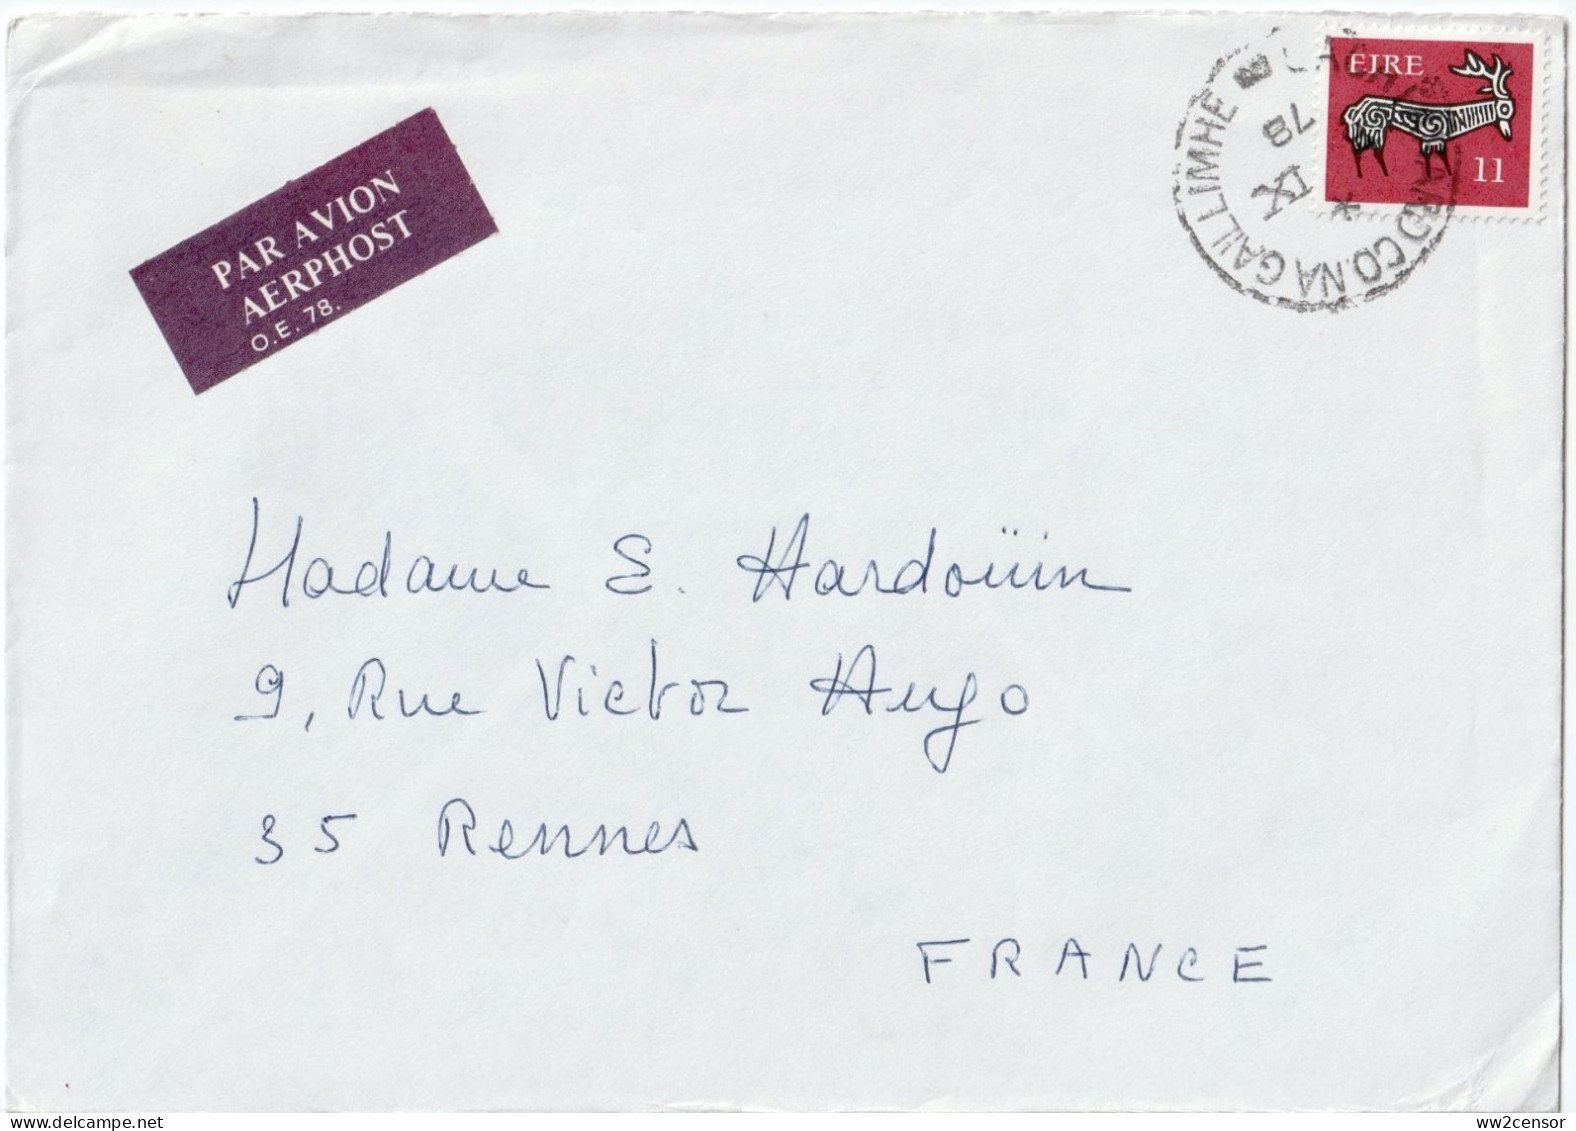 Ireland-Irlande-Irland: 11p Gerl Definitive On 1978 Commercial Cover Oughterard, Co Galway - France - Lettres & Documents